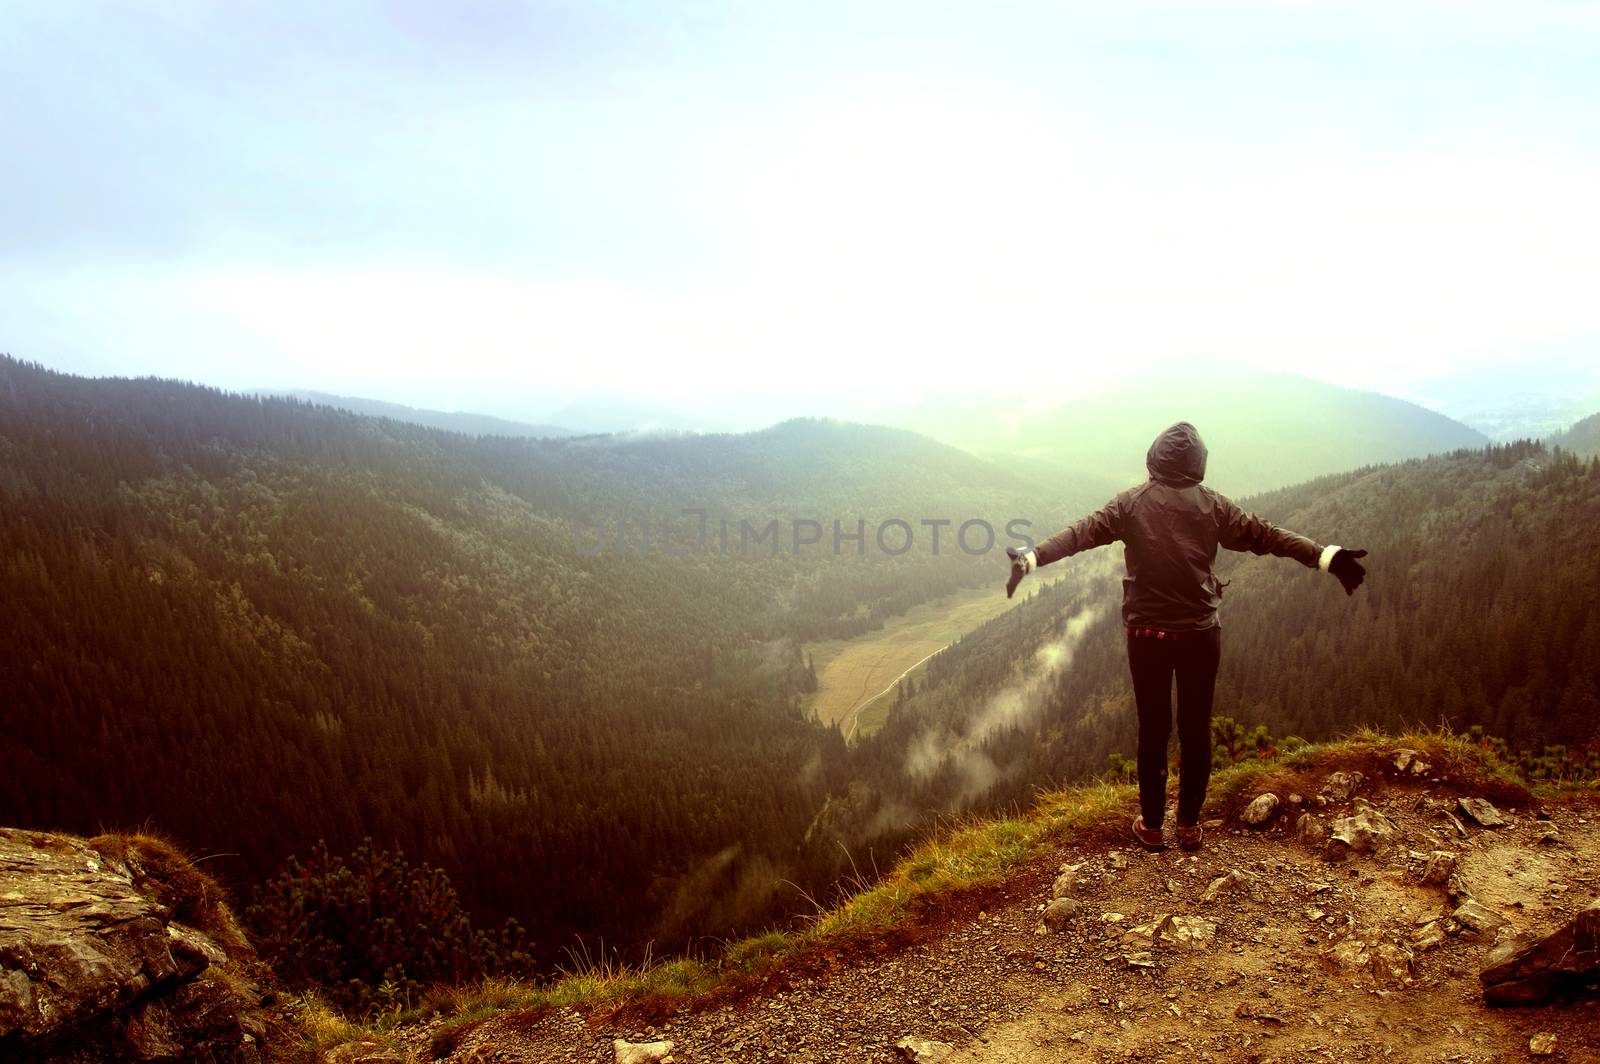 One person feel freedom in beautiful mountains scenery.